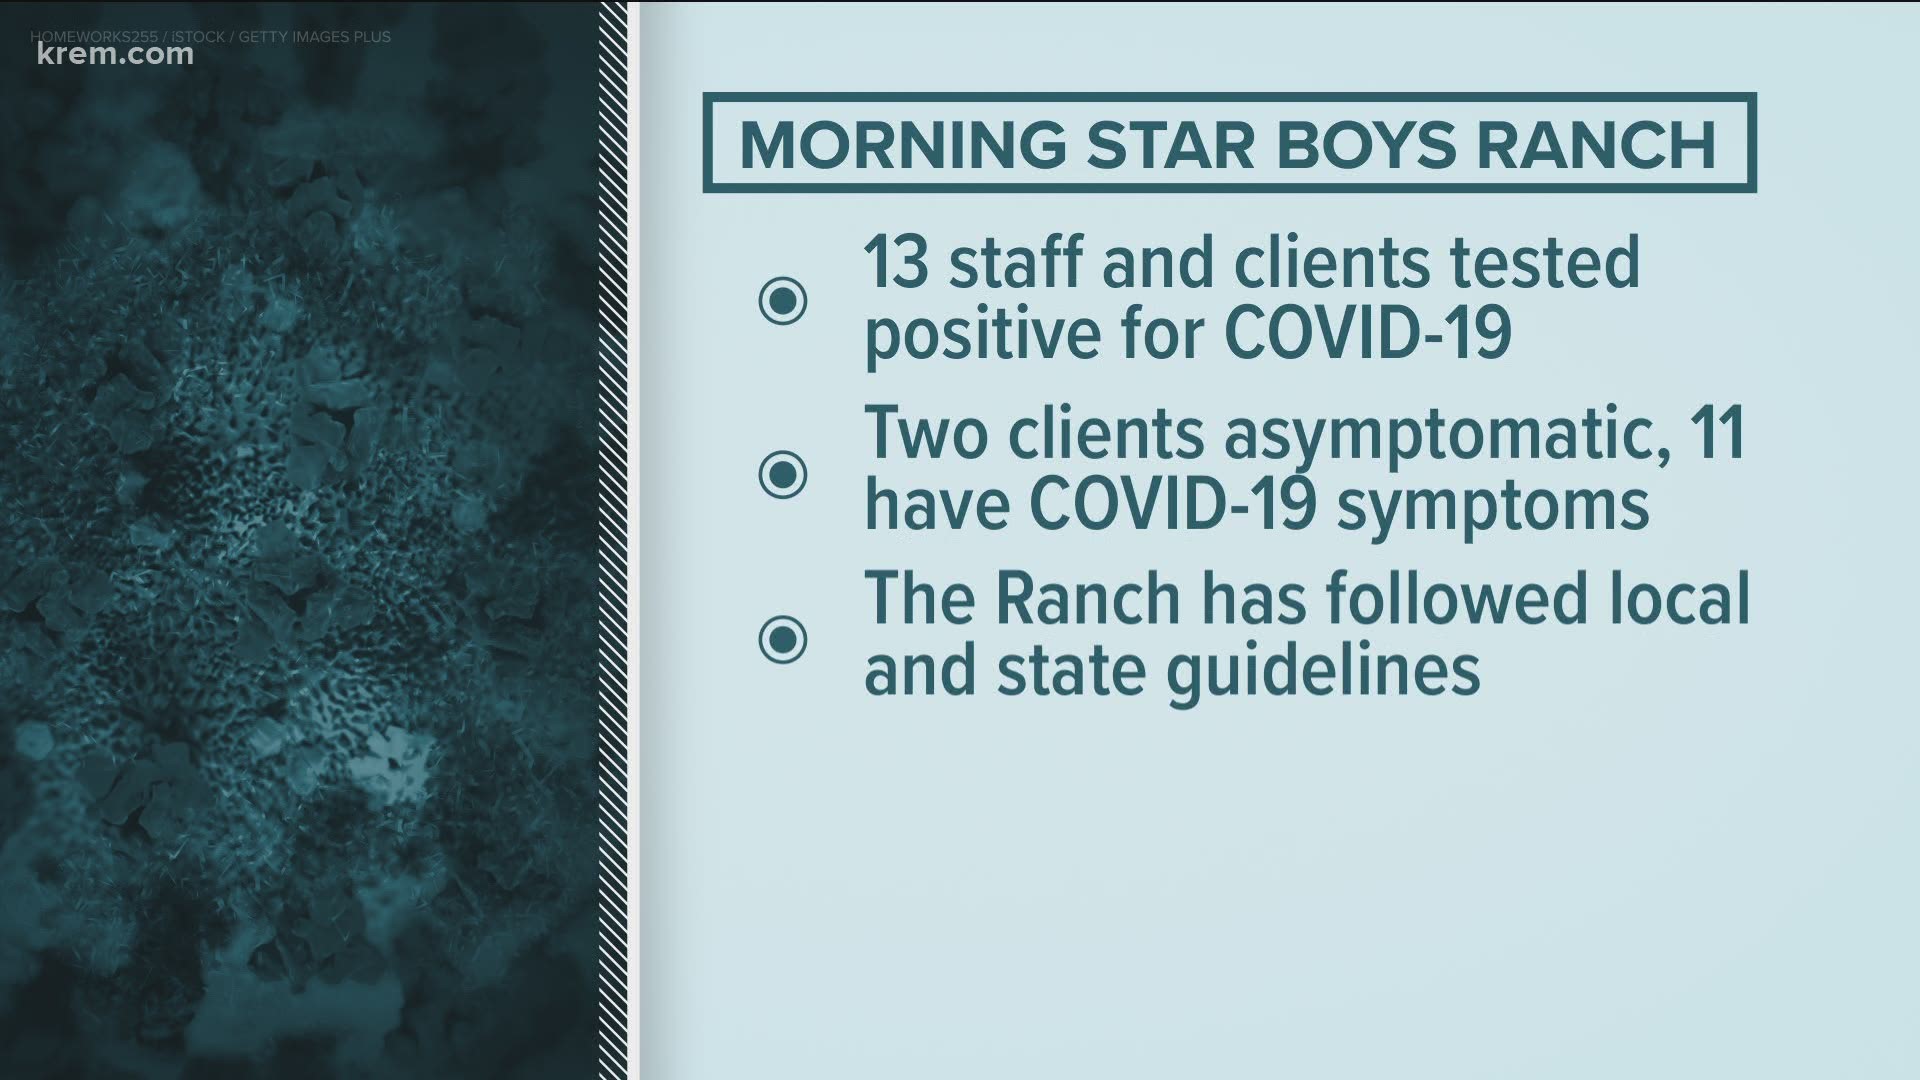 Four of the clients are asymptomatic, while five team members and two clients have coronavirus symptoms, according to Morning Star Boys' Ranch.